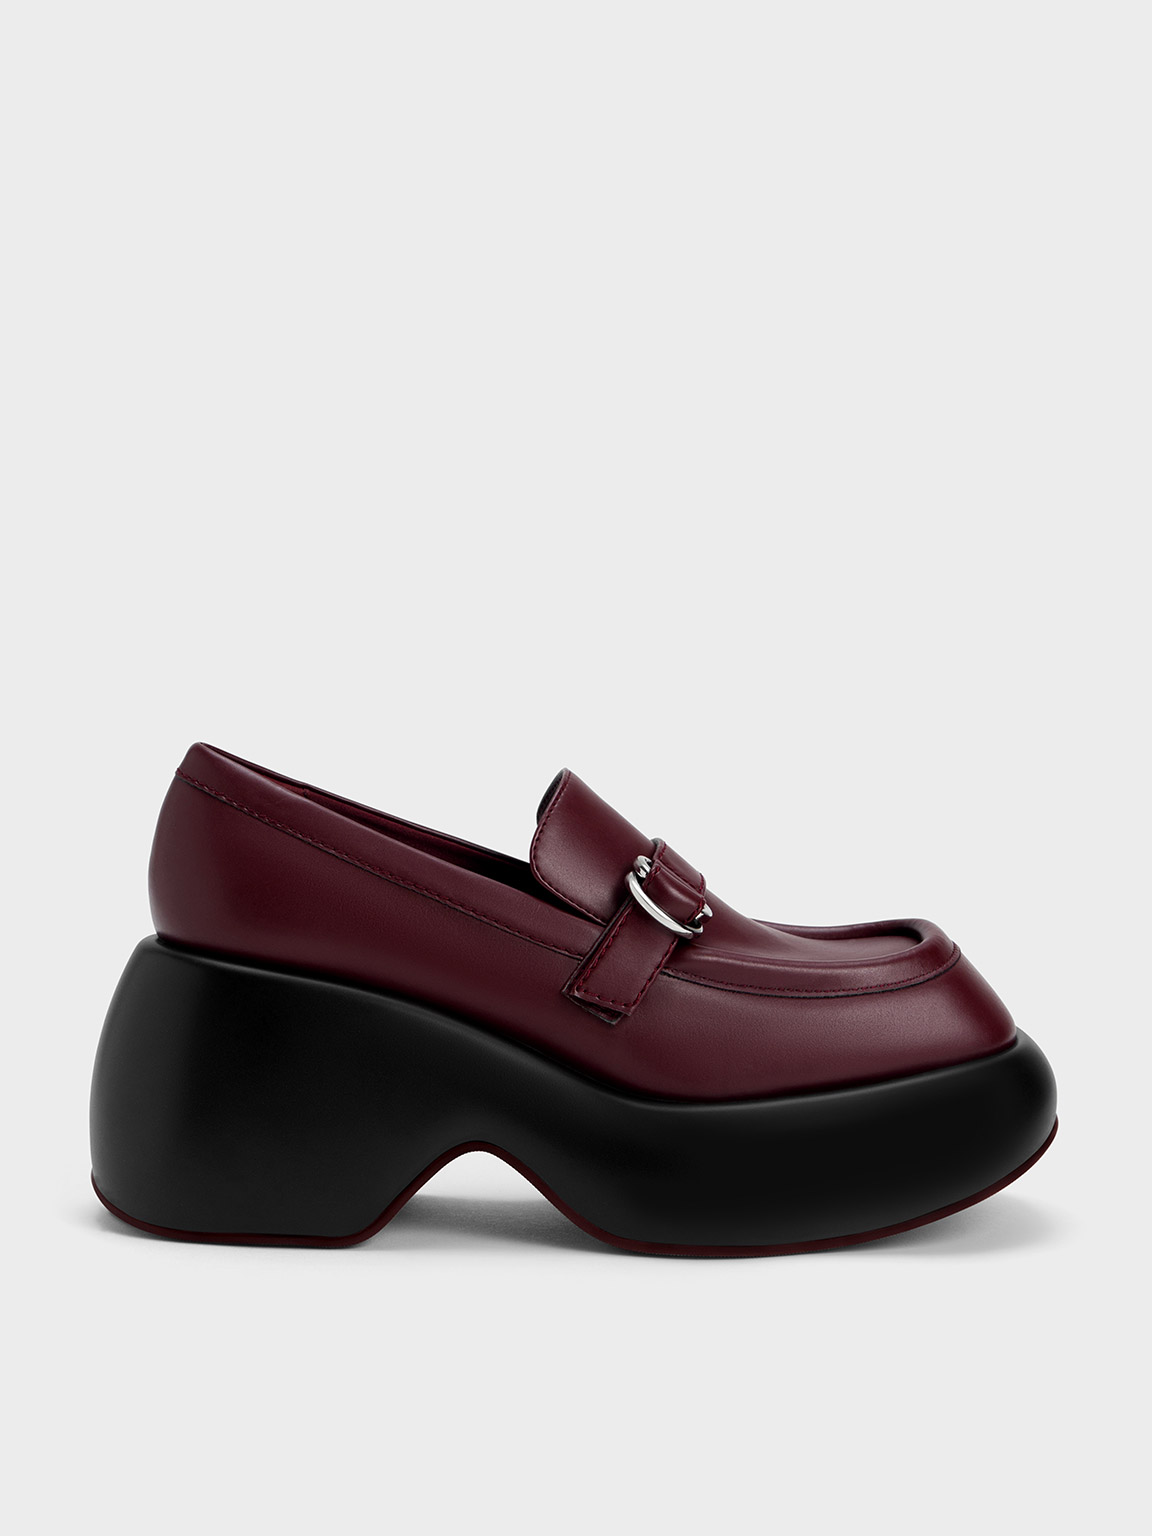 Charles & Keith Buckled Platform Penny Loafers In Burgundy